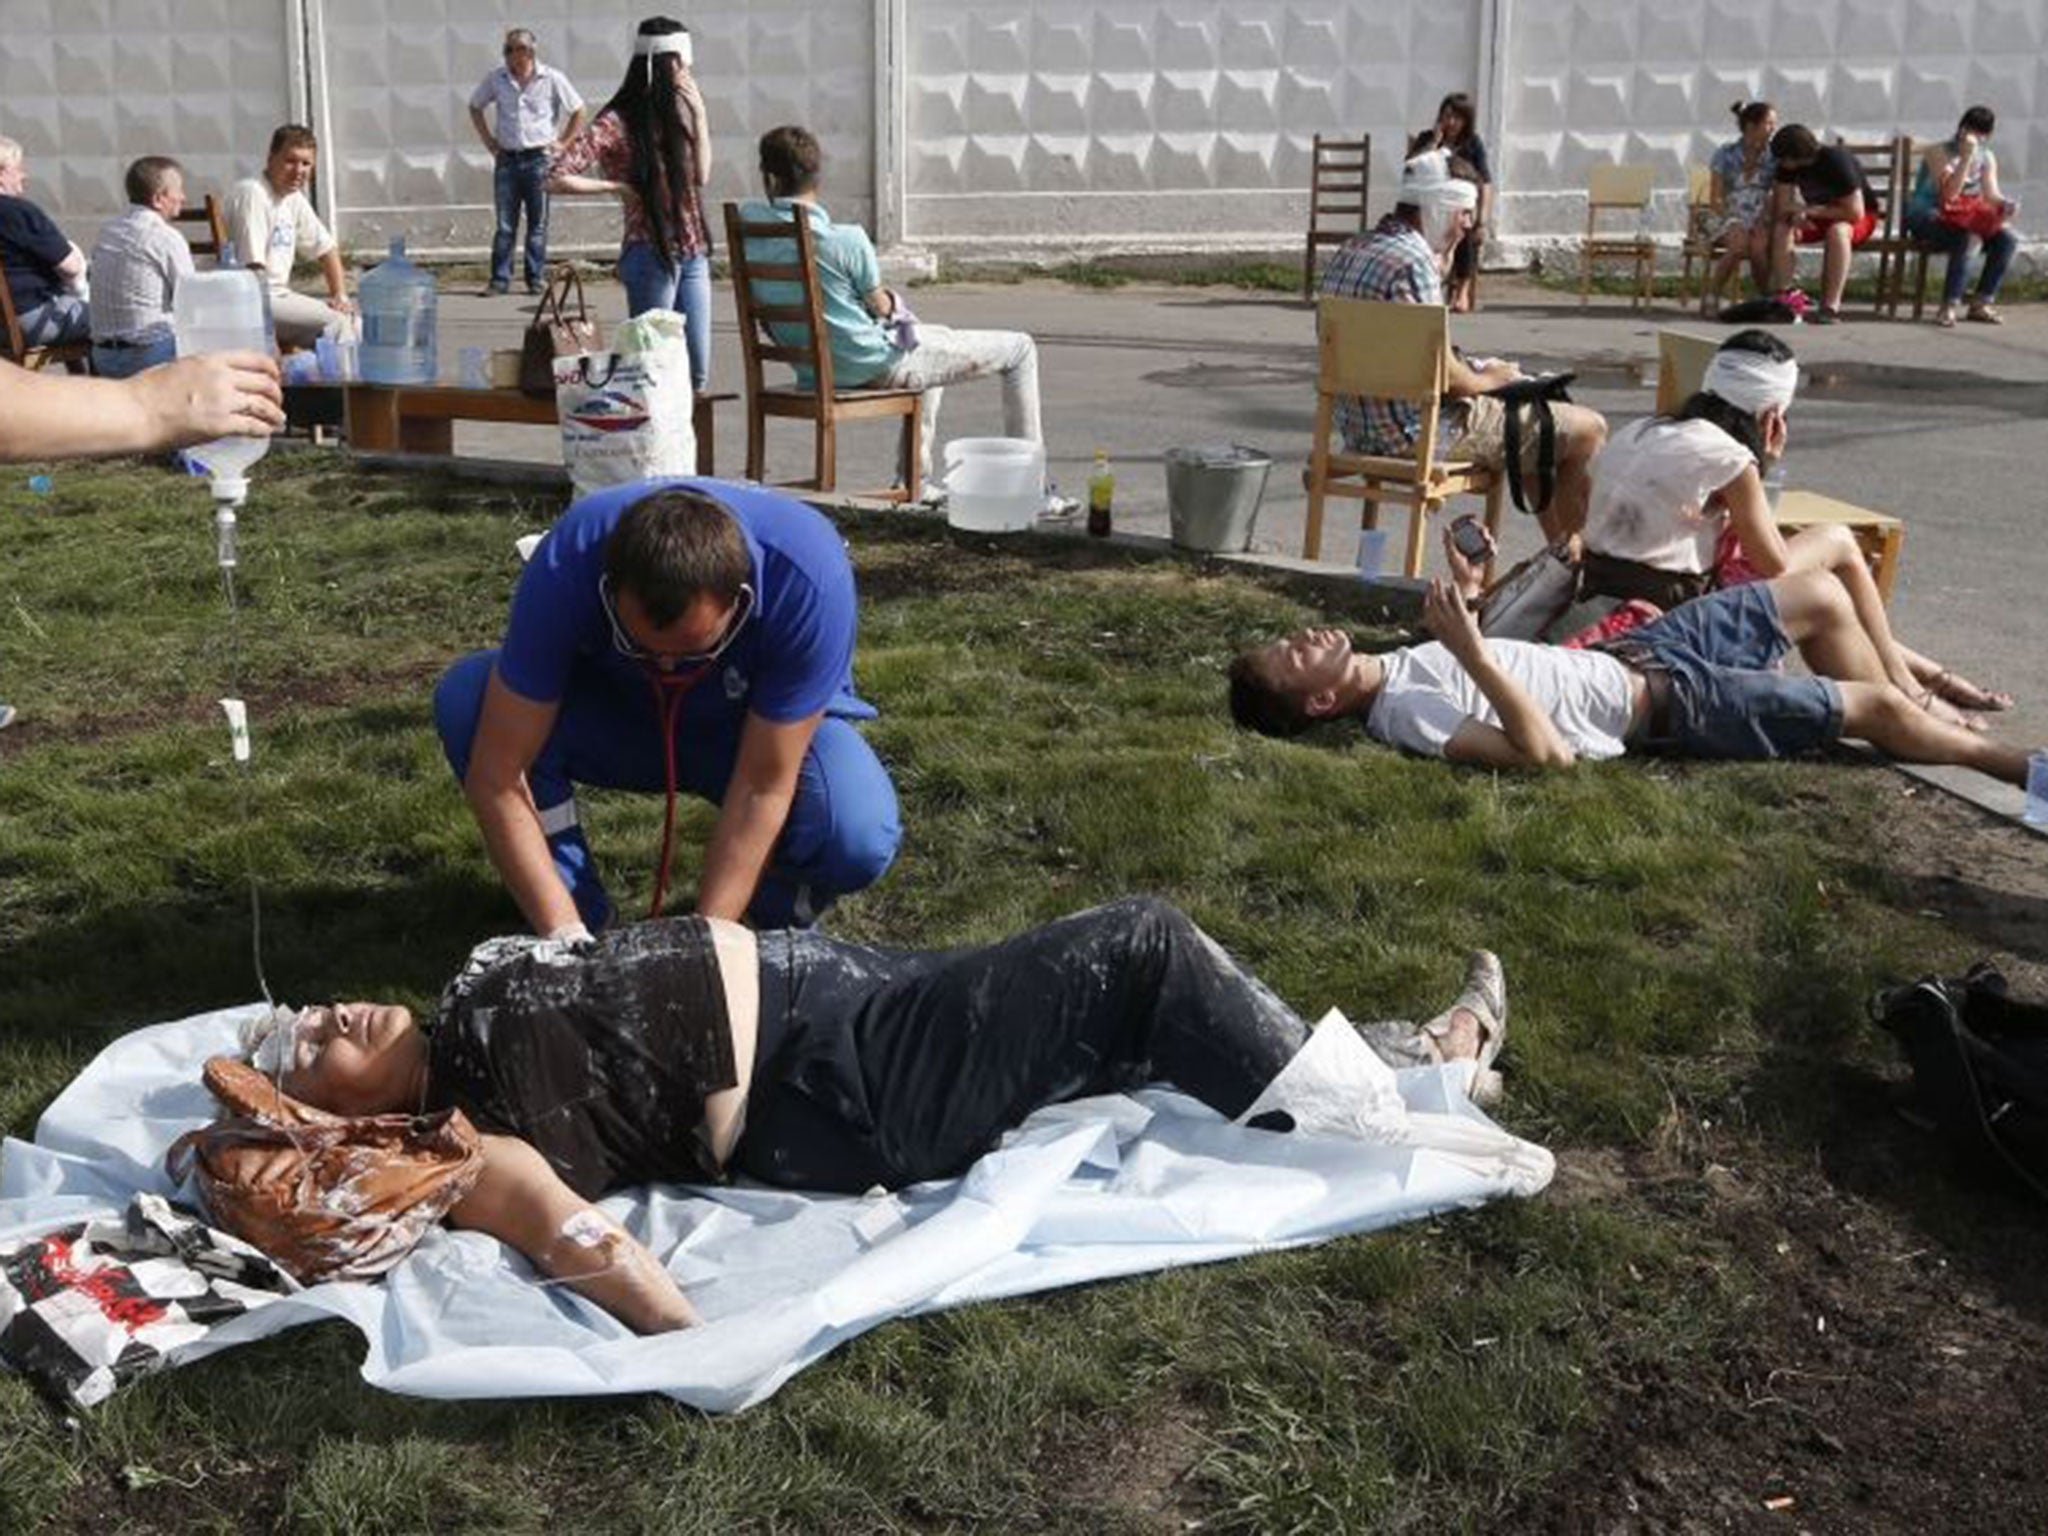 Paramedics treat passengers injured as several subway cars derailed in Moscow, on July 15, 2014.